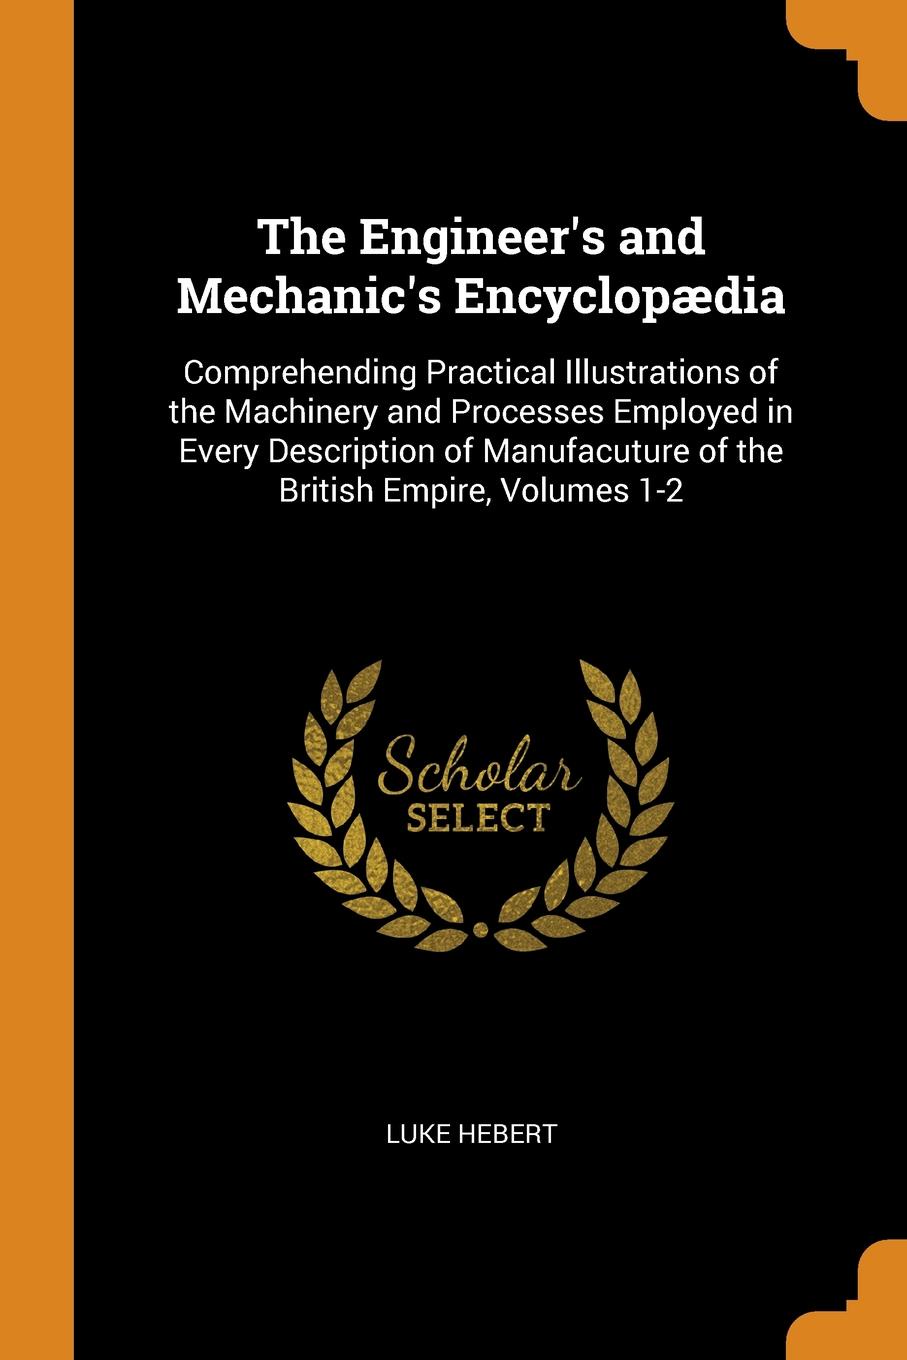 фото The Engineer.s and Mechanic.s Encyclopaedia. Comprehending Practical Illustrations of the Machinery and Processes Employed in Every Description of Manufacuture of the British Empire, Volumes 1-2